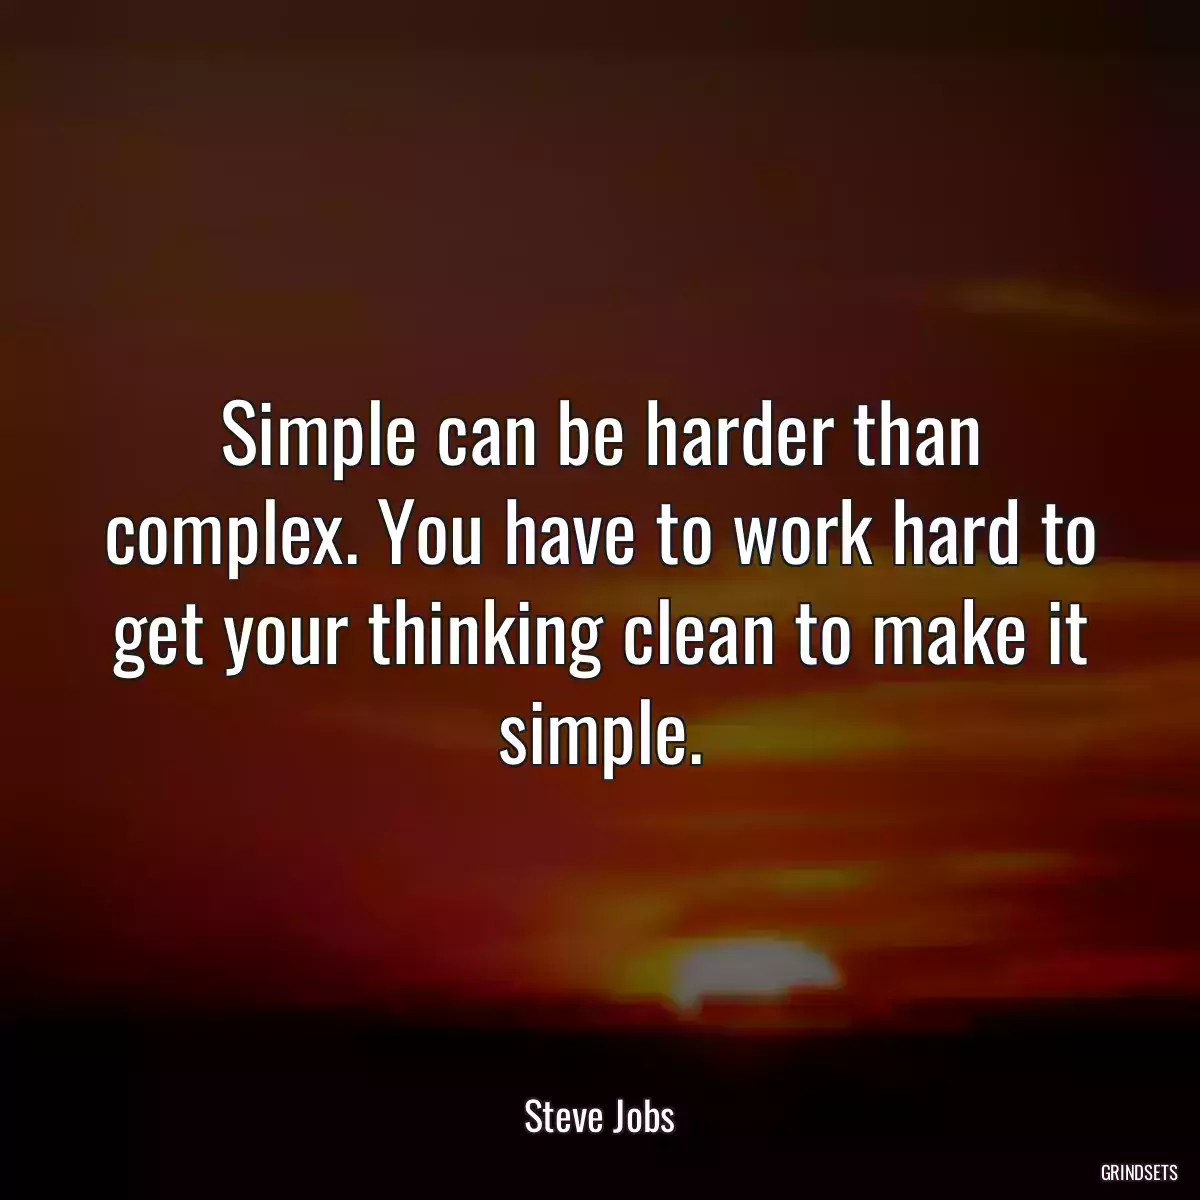 Simple can be harder than complex. You have to work hard to get your thinking clean to make it simple.